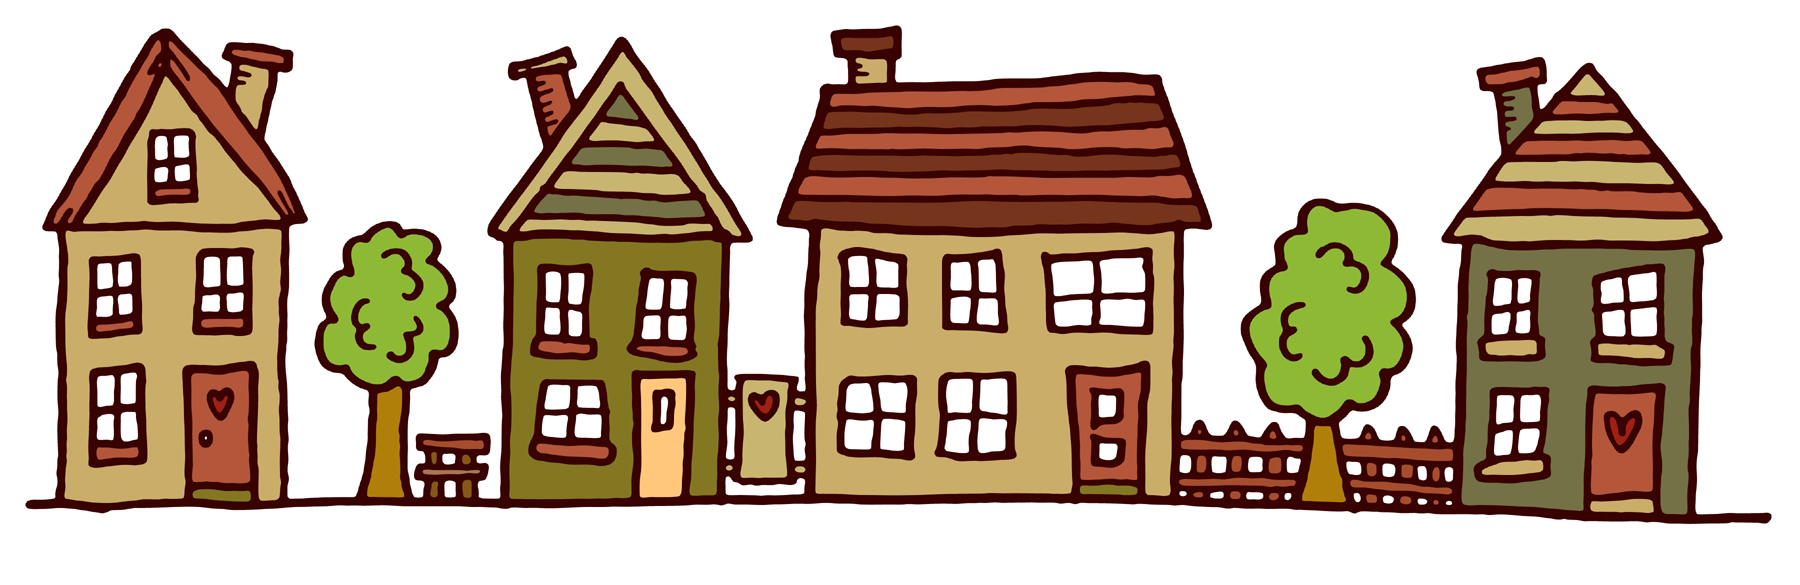 Images For Row Of Houses Clipart